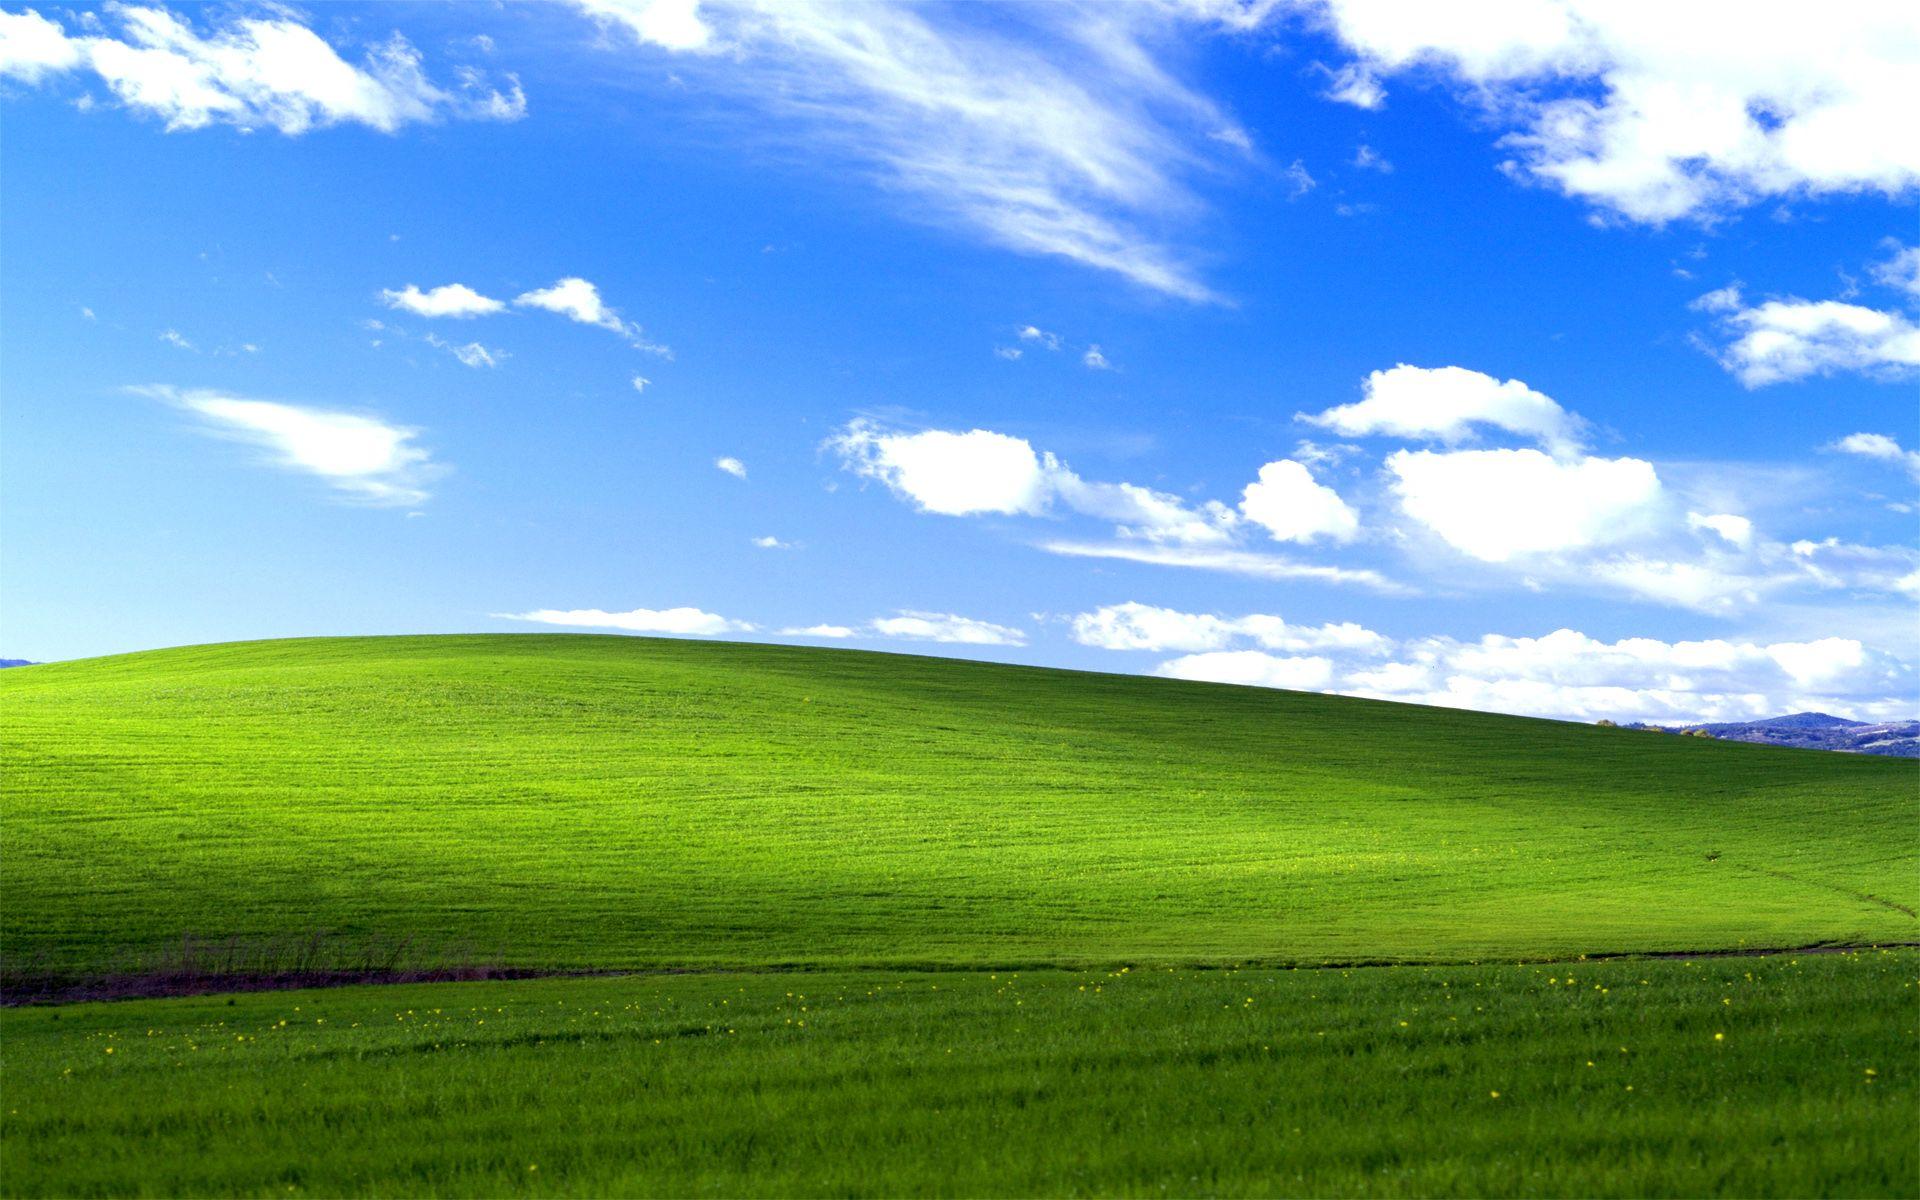 The History Behind Microsoft XP's “Bliss” Background